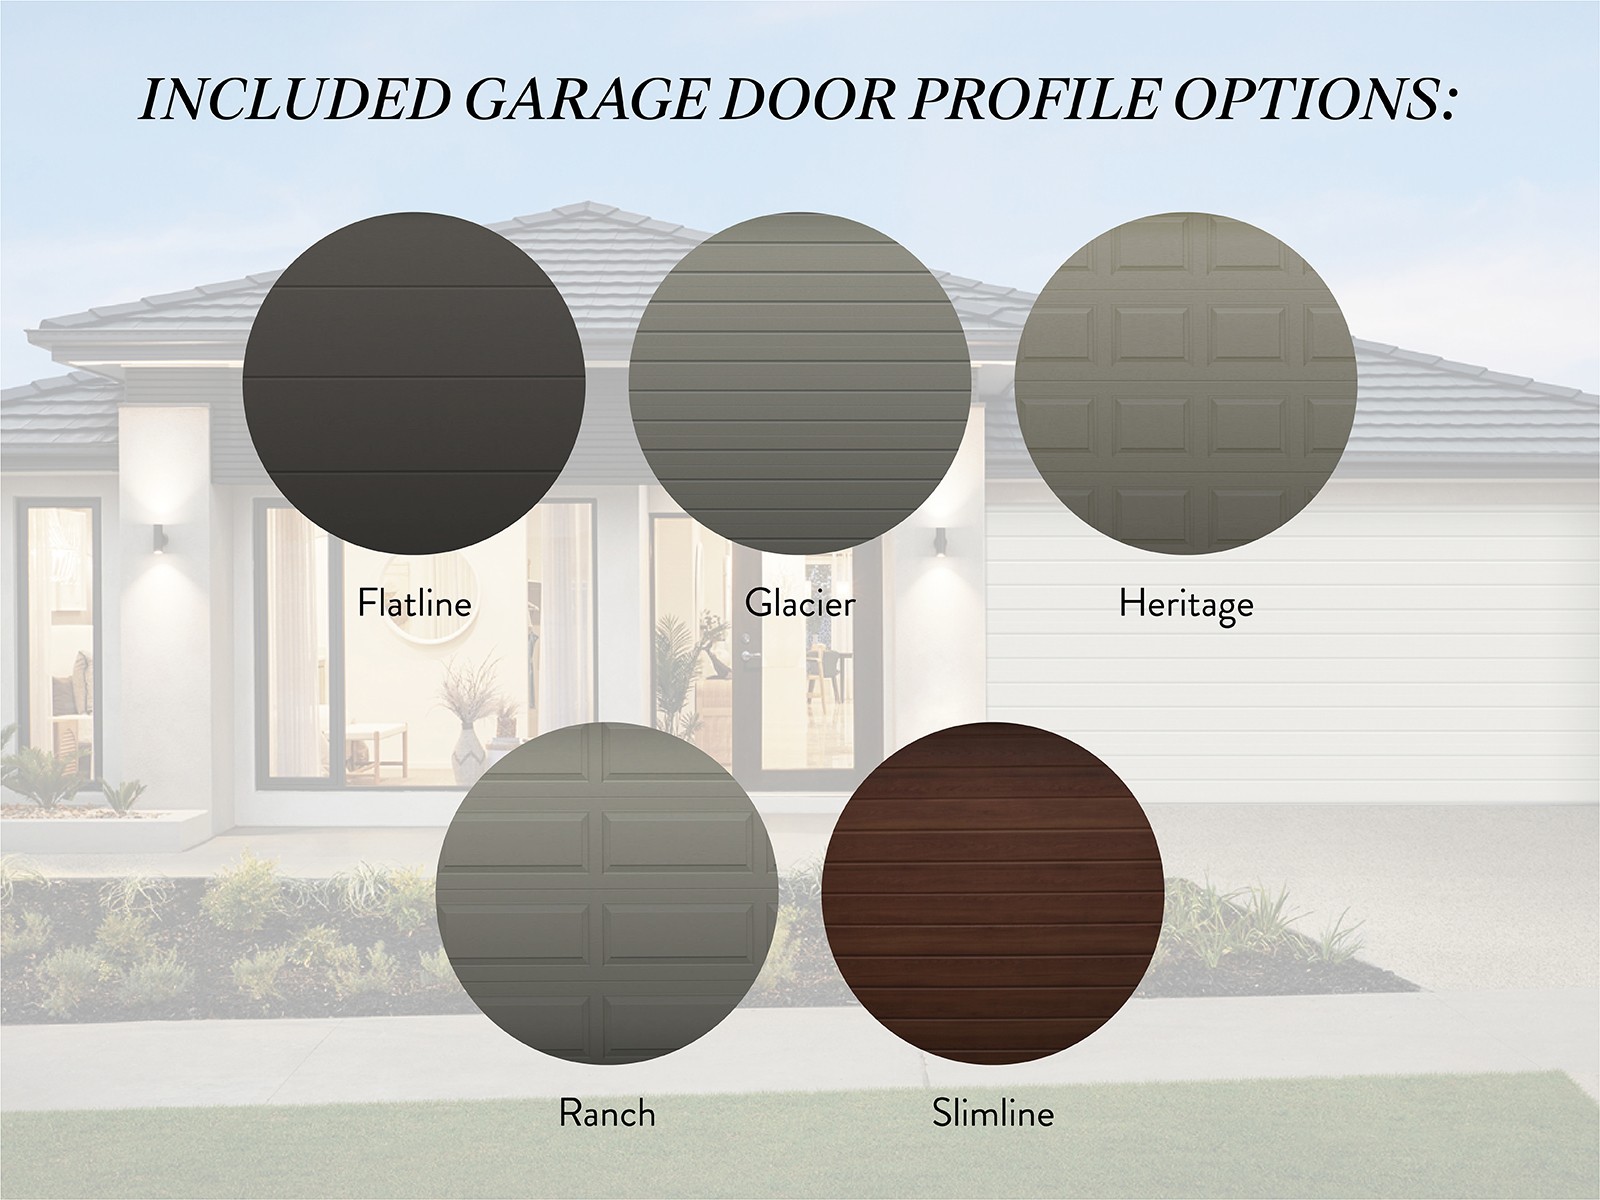 Enhance-Your-Exterior-with-a-Gorgeous-Garage-Door-carlisle-homes-graphic1__Resampled.jpg